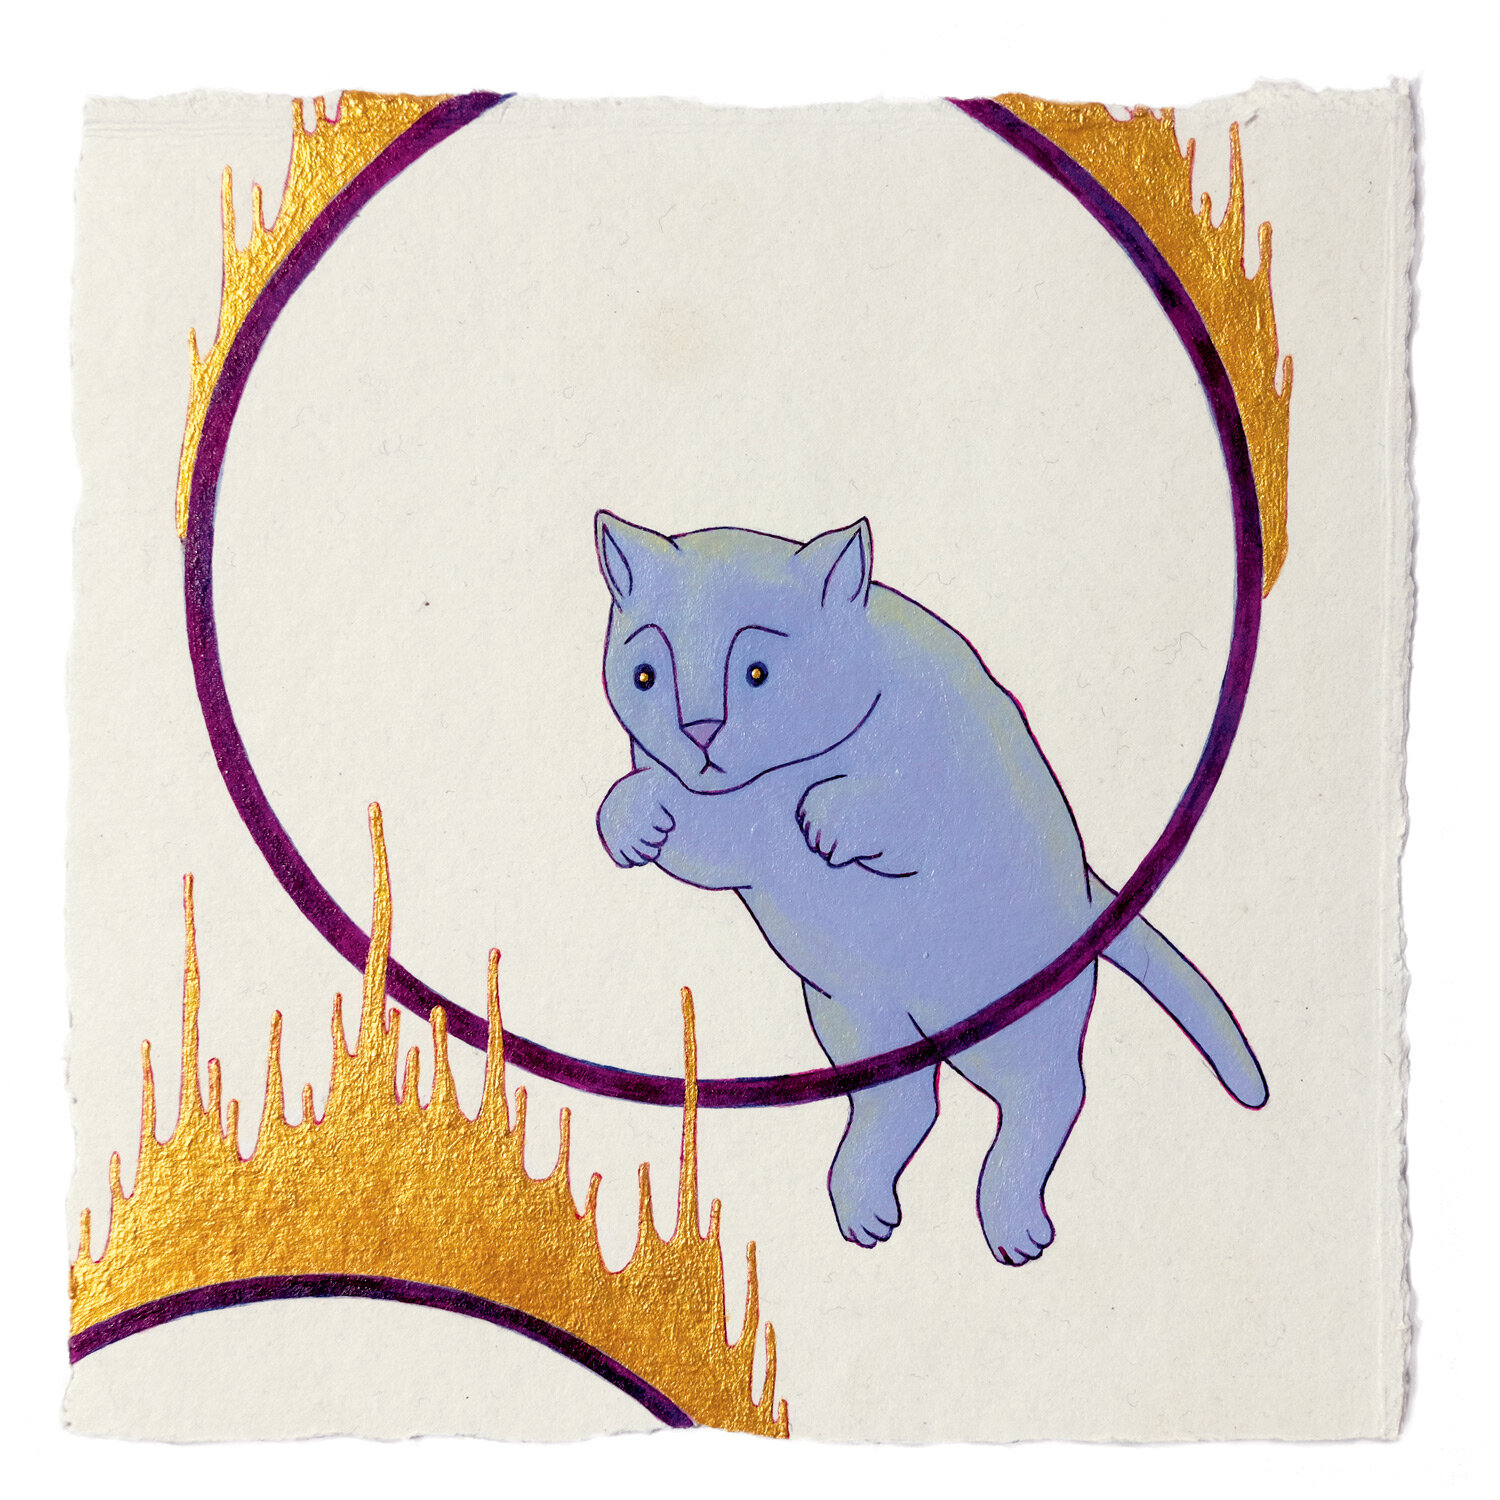   Fire Diary (Cat Leap), &nbsp;2020 Acrylic on paper, 6” x 6” each 